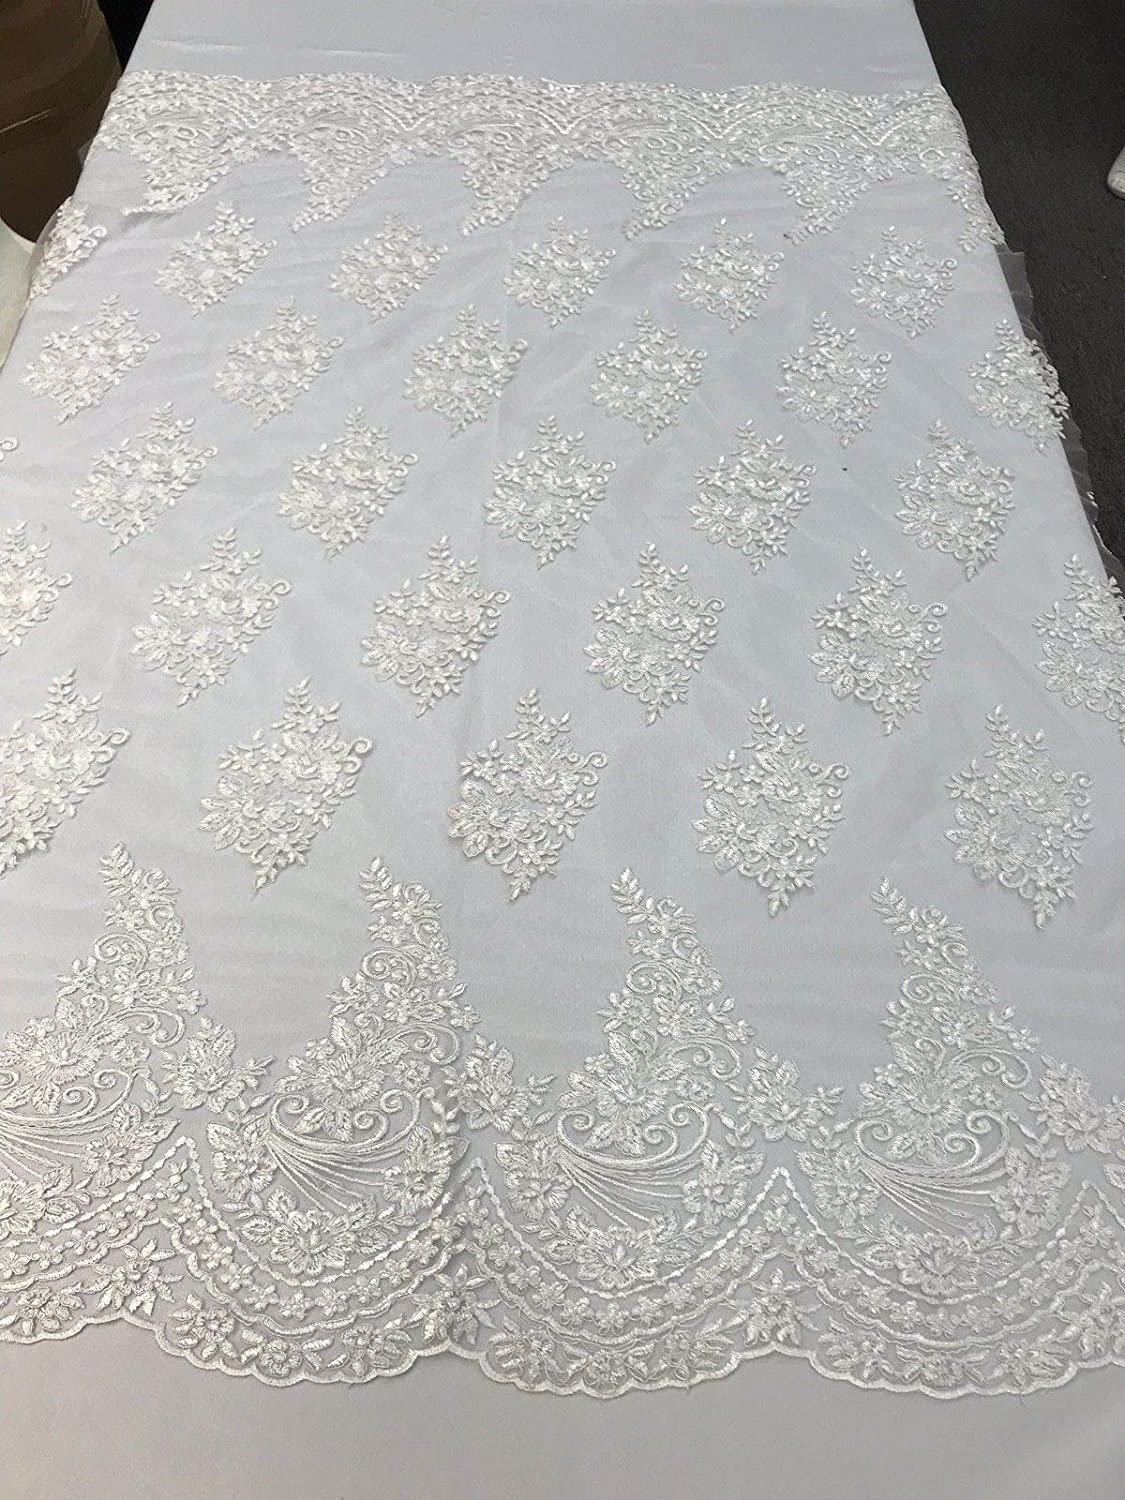 WHITE FLORAL DESIGN WITH CORD EMBROIDERY ON A MESH LACE-SOLD BY YARD.